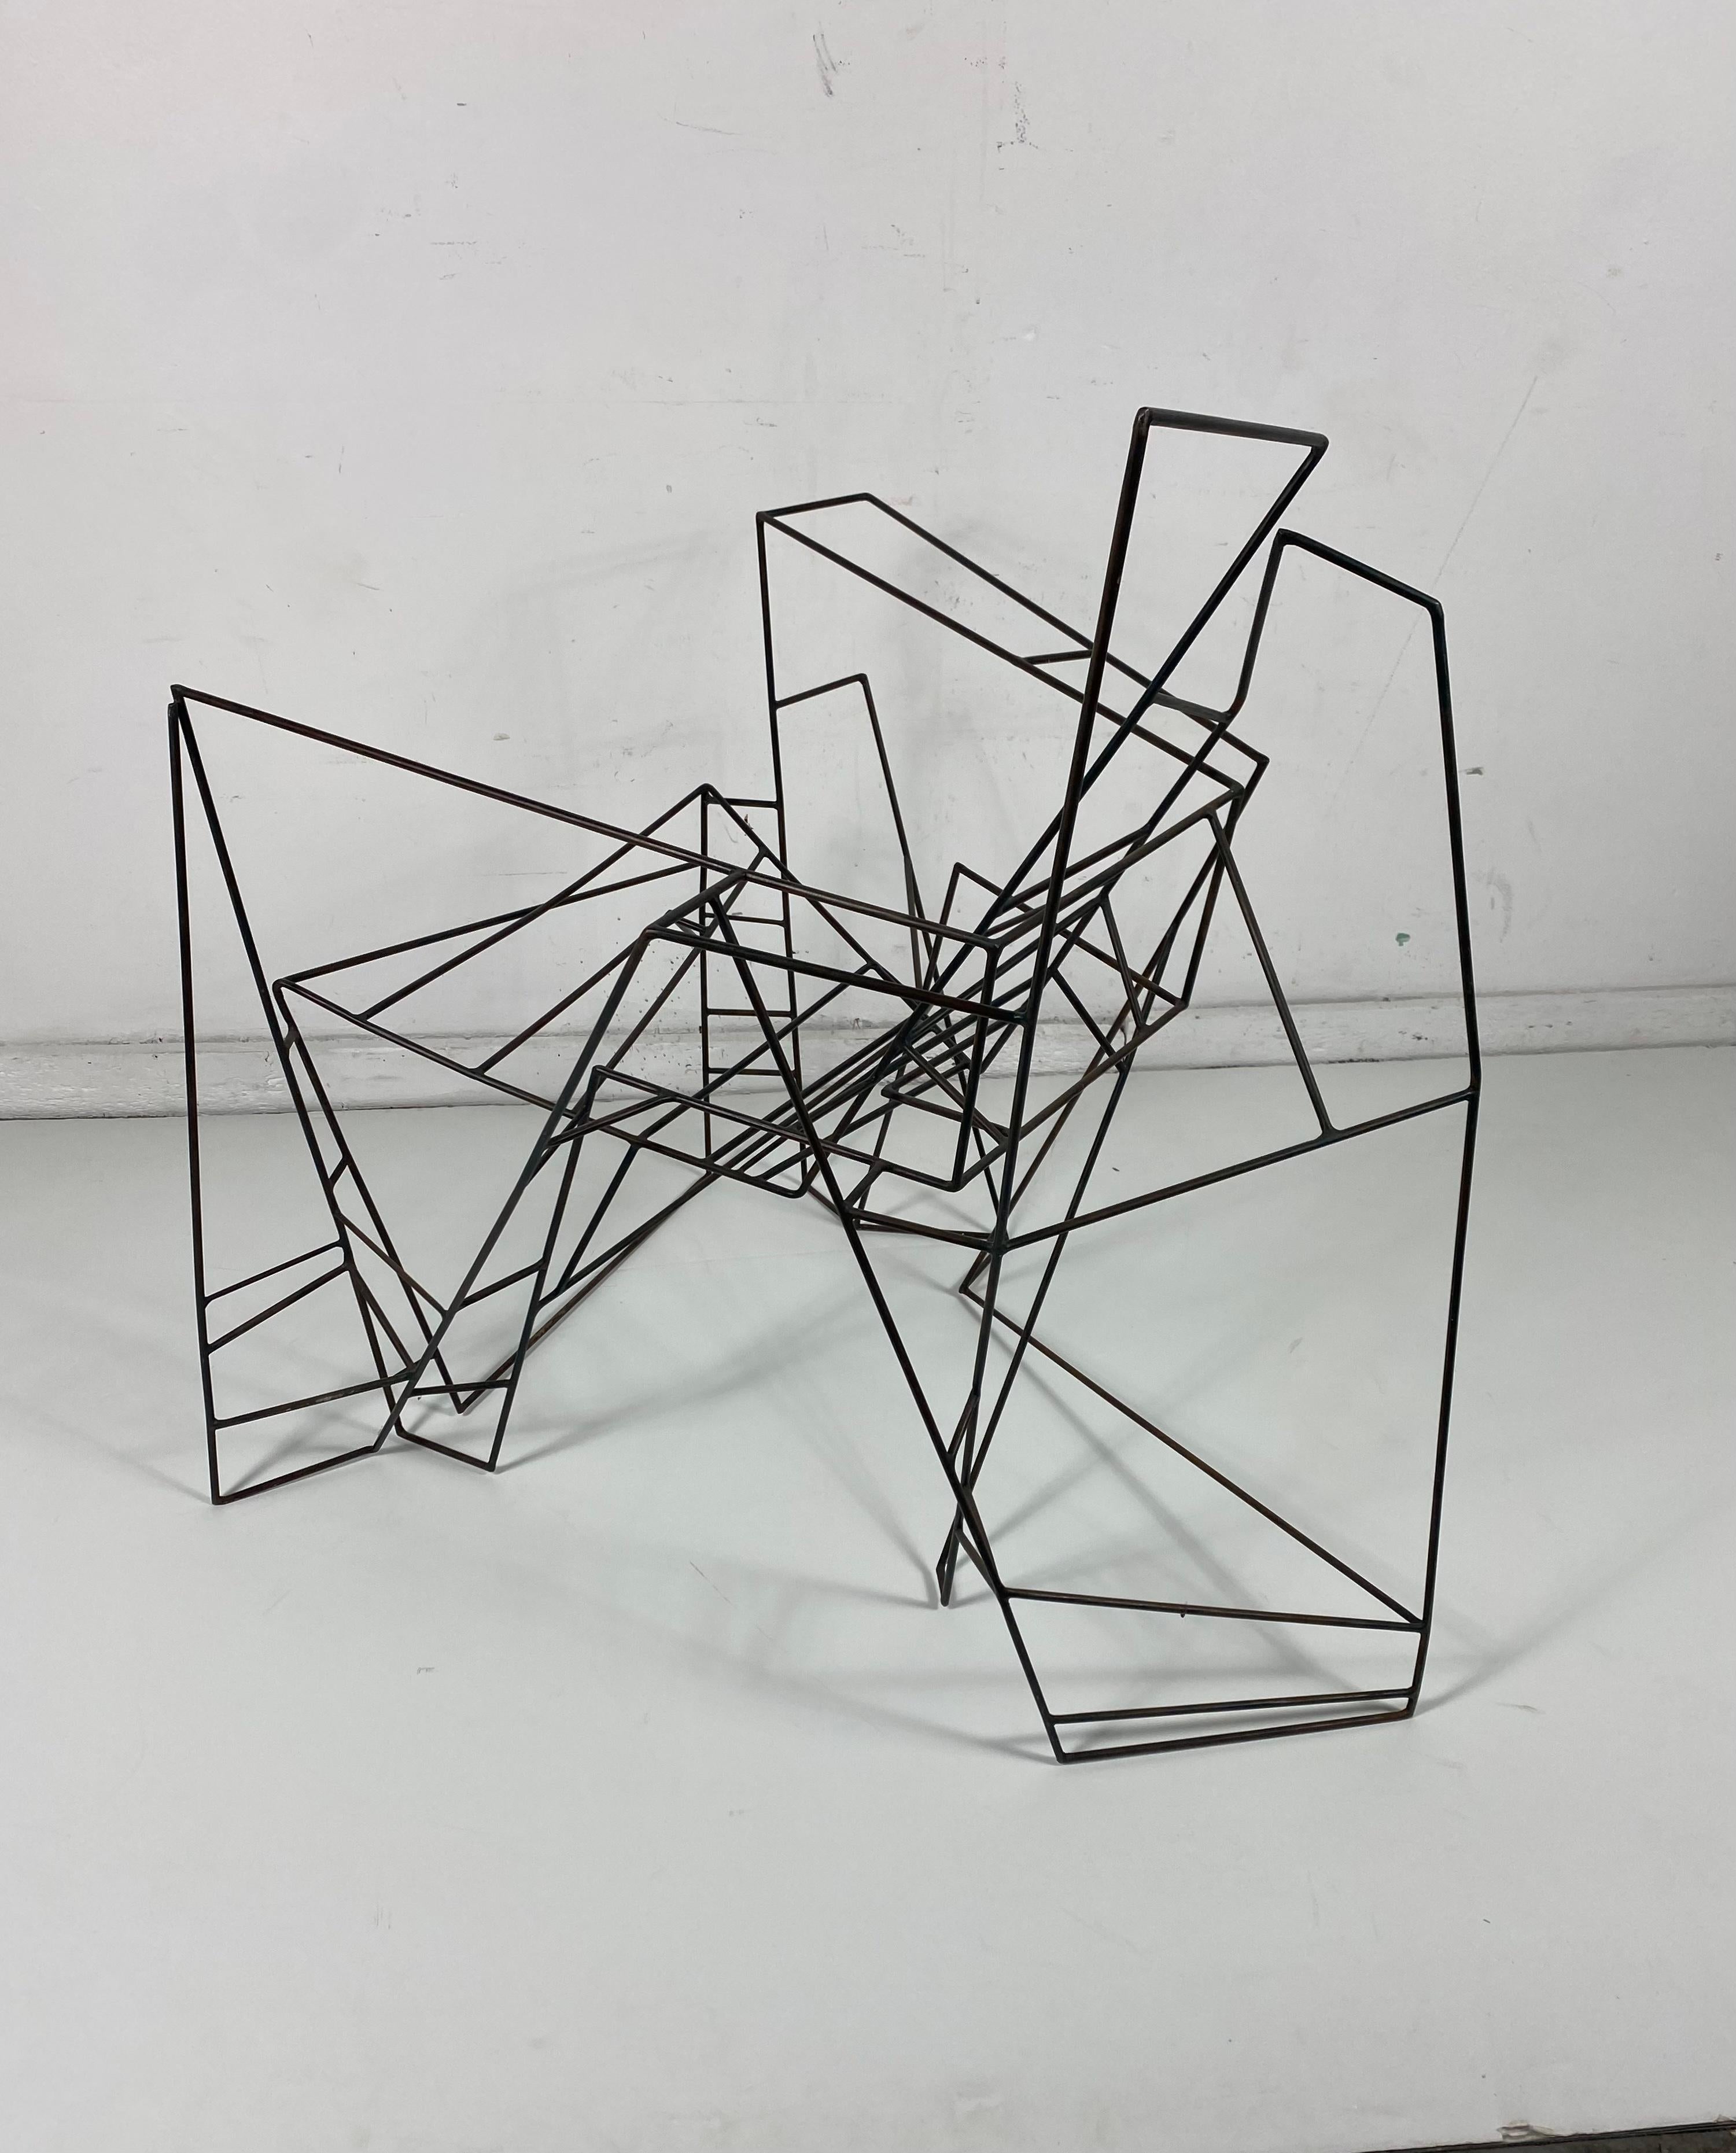 Hand-Crafted Unusual Artist Built Wire-Iron Chair / Sculpture, Constructivism